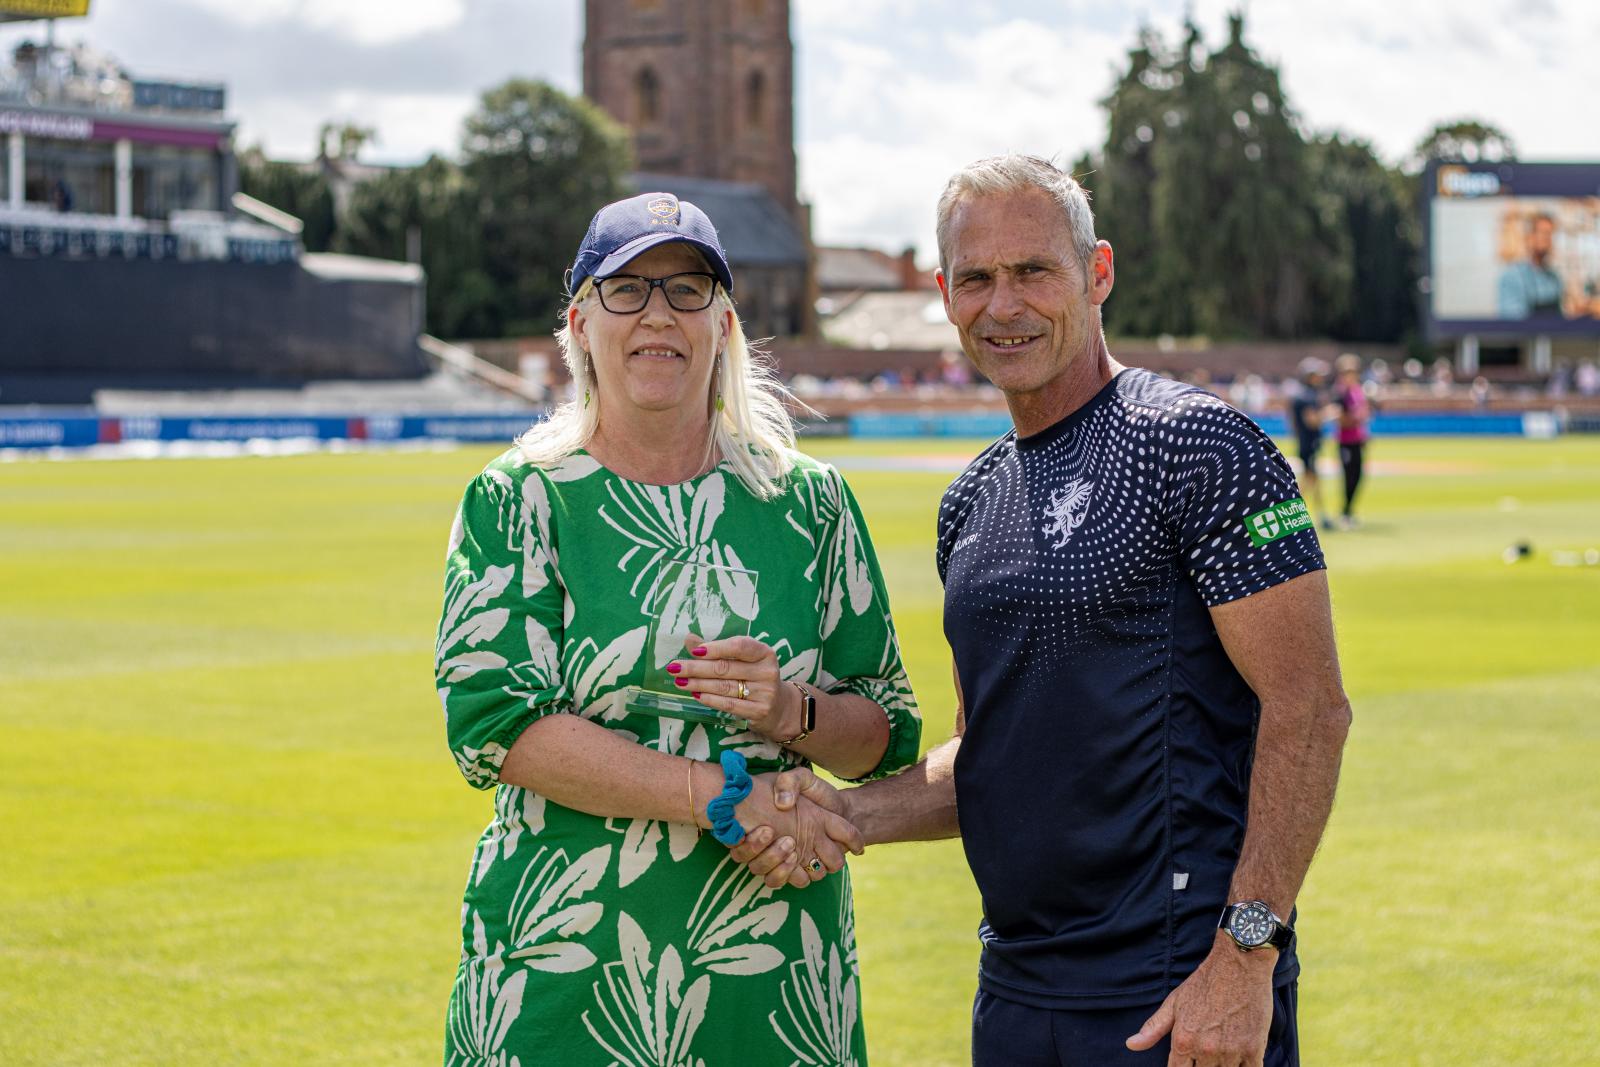 Anne Stone receives her award at the Cooper Associates County Ground.